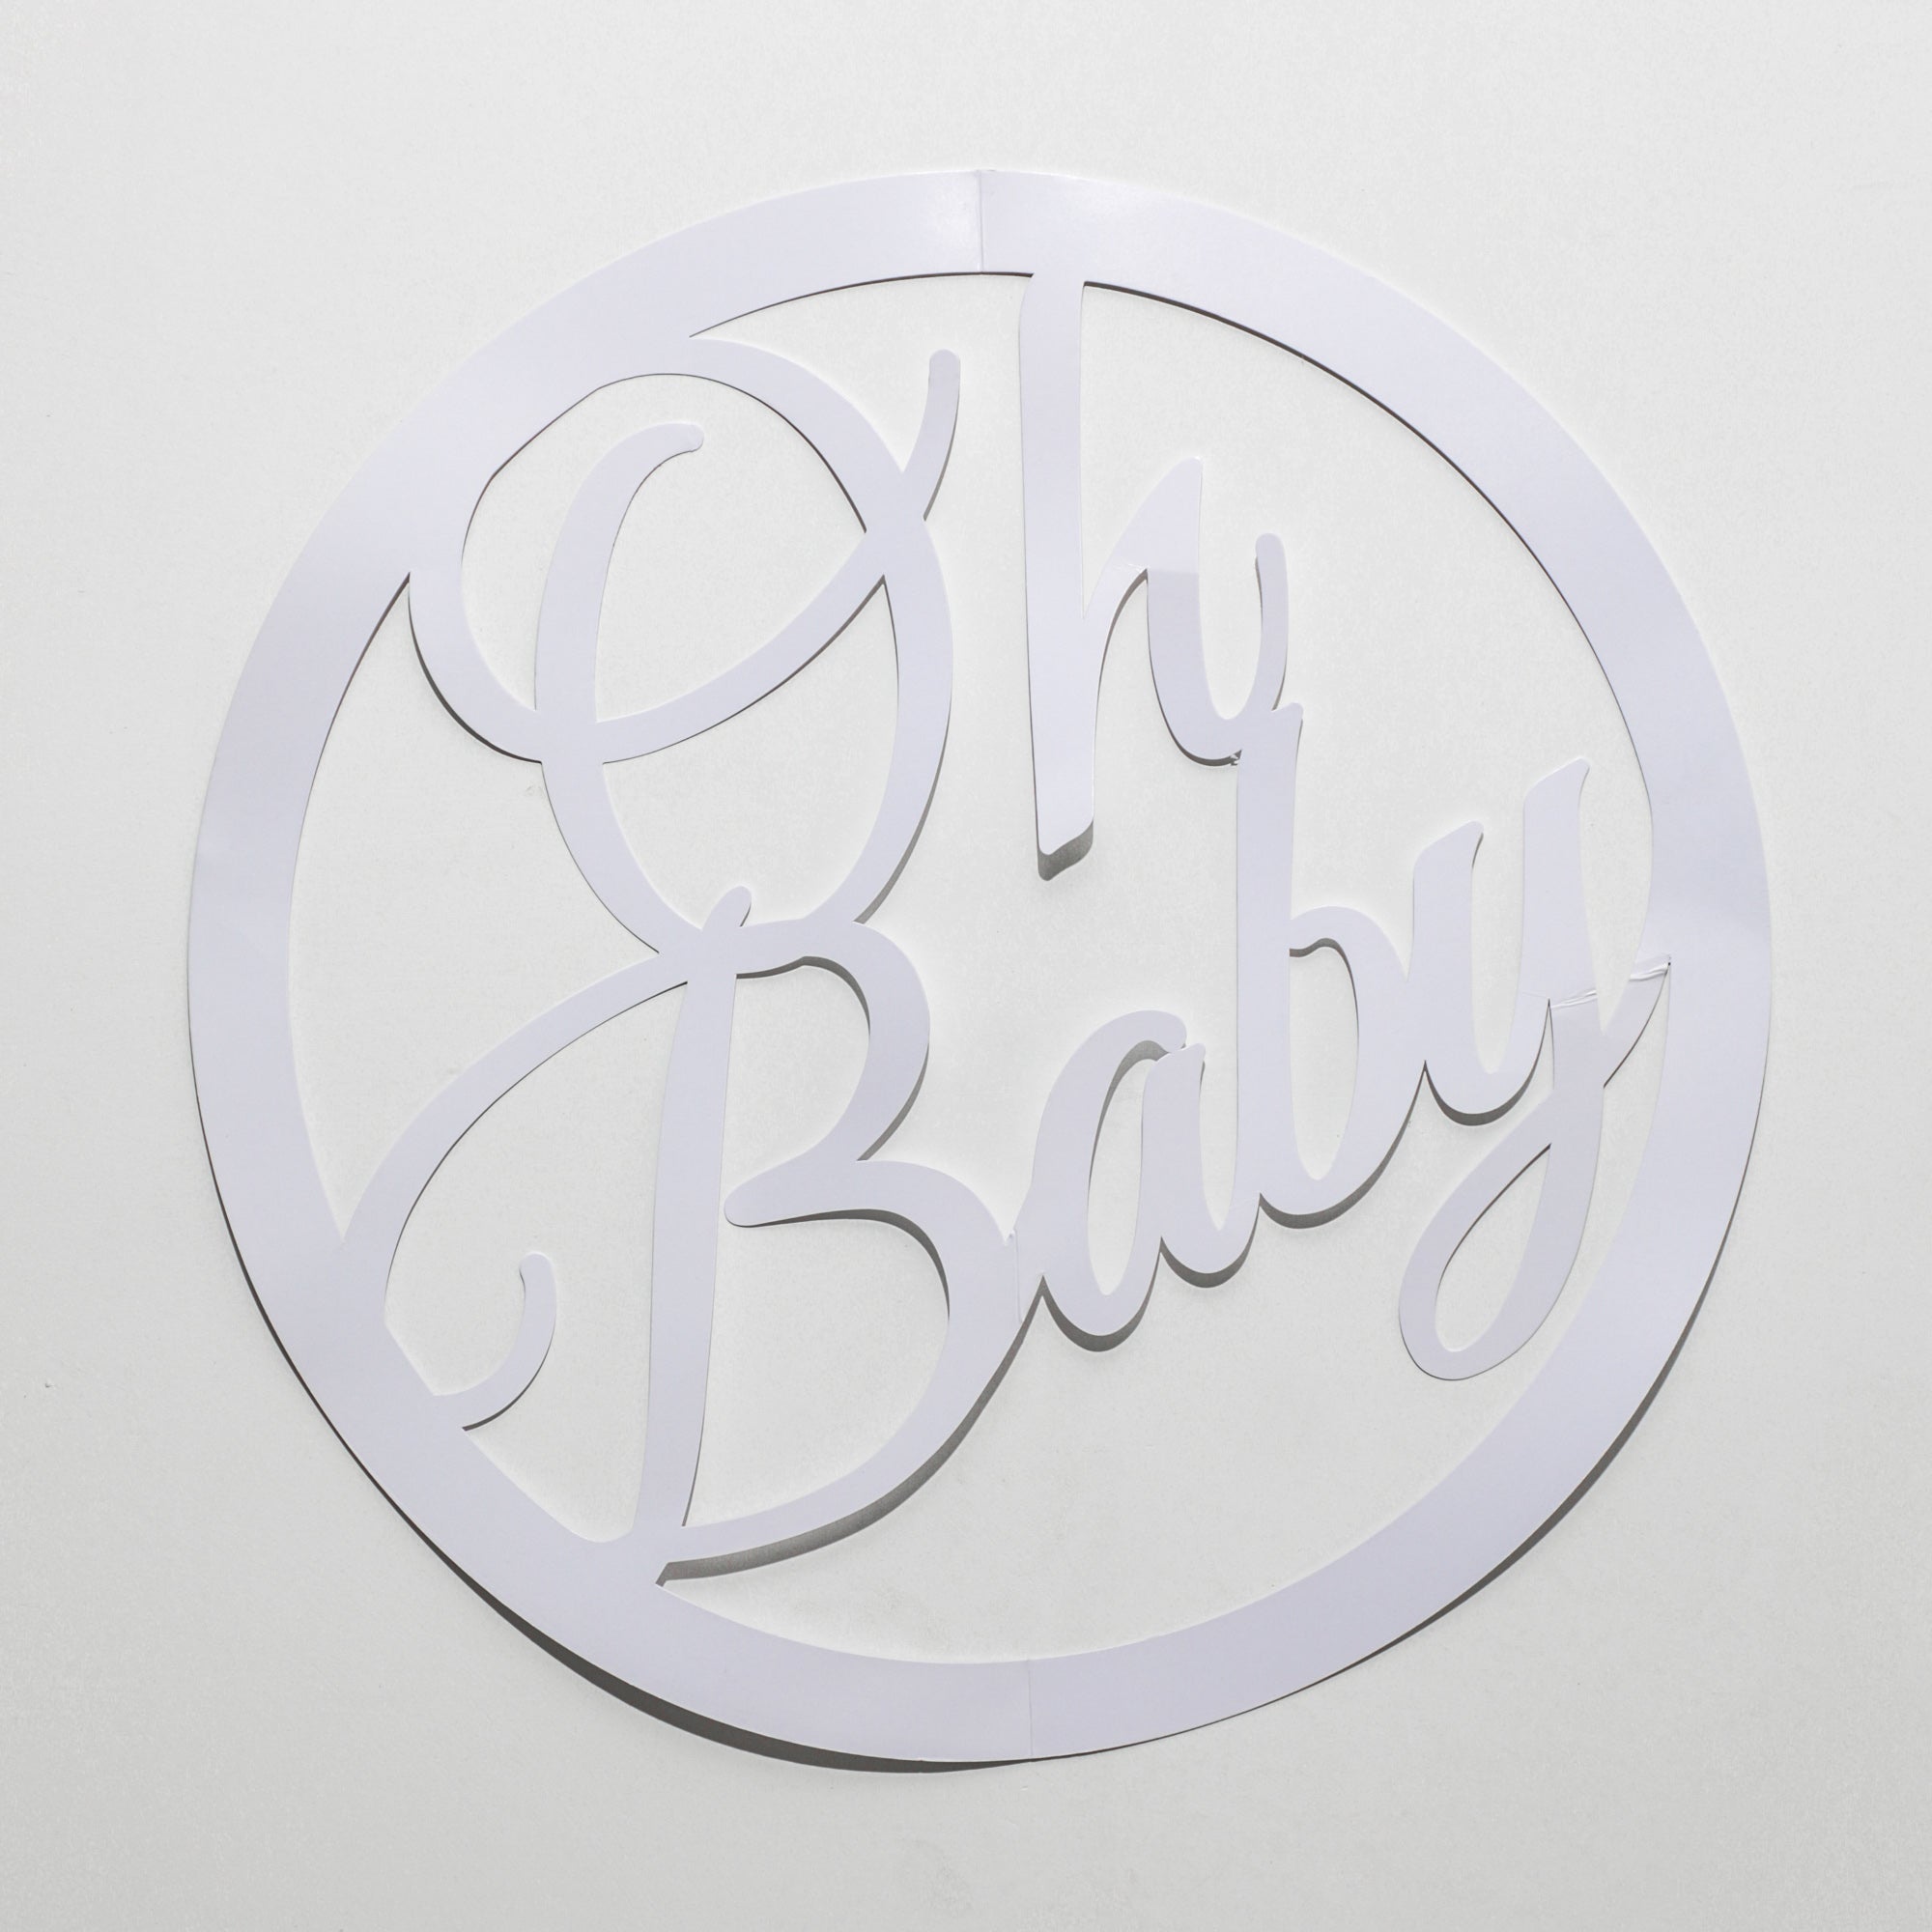 Oh Baby background decoration cutouts for kids parties